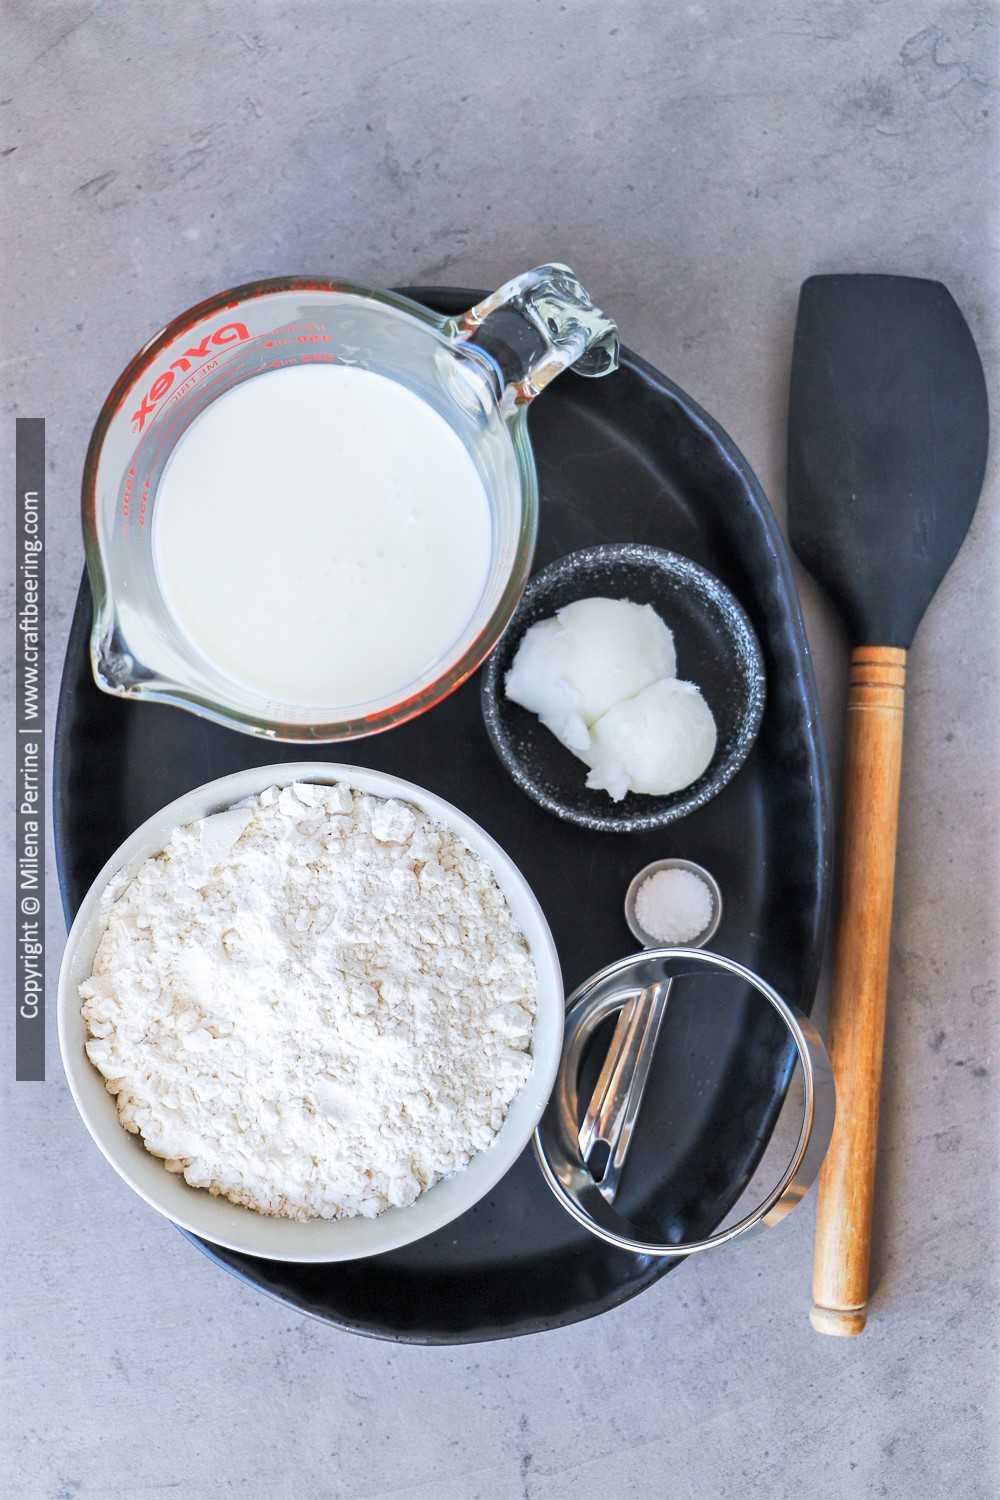 Ingredients for homemade cathead buttermilk biscuits